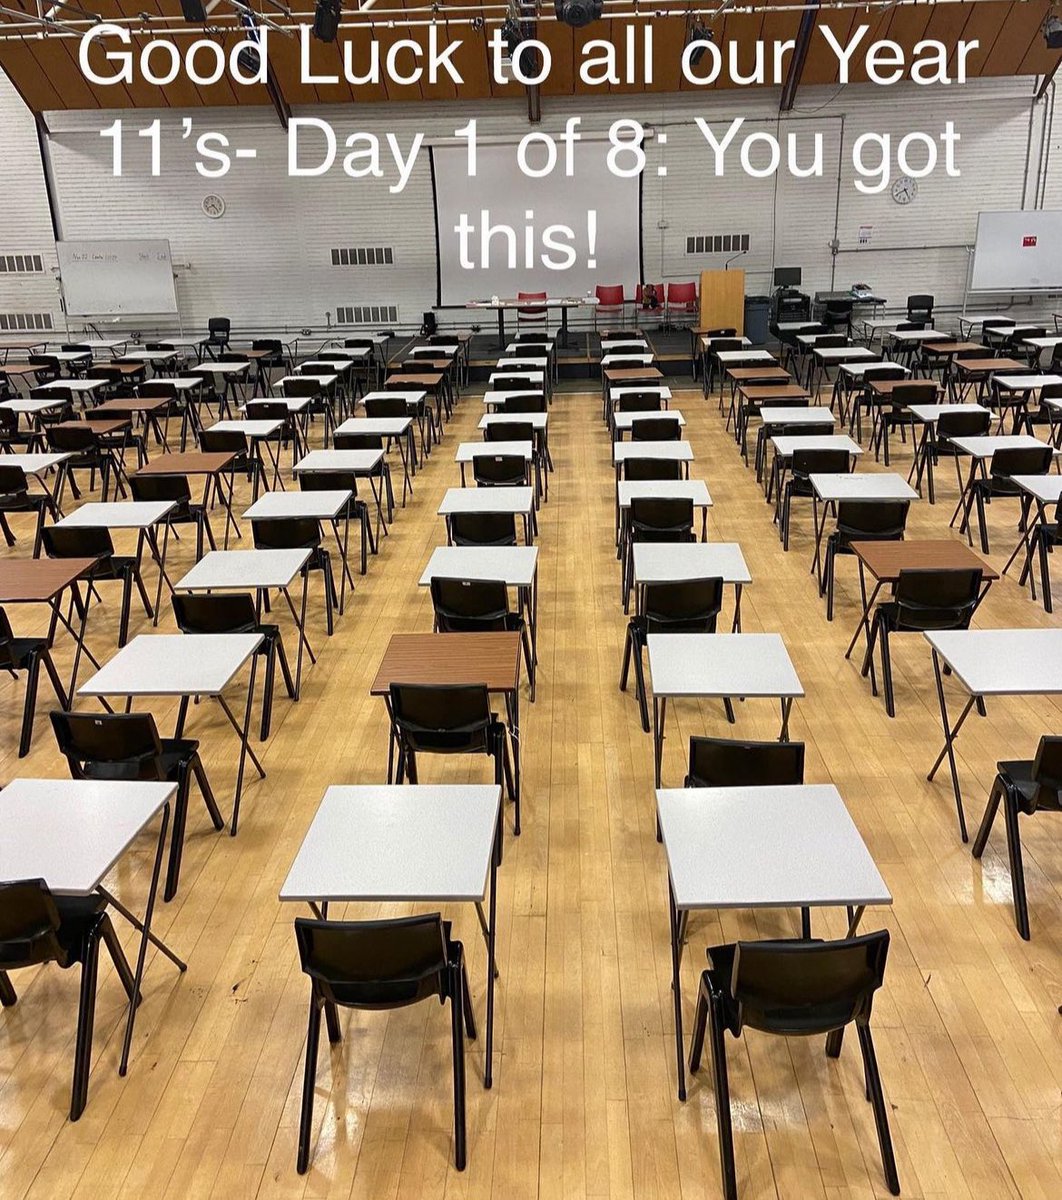 Things are getting real! Good luck to our Year 11 students who start their mock exams today. At Burntwood, we replicate public exam conditions for all mocks, helping students to prepare mentally & academically, for their public exams. Just 6 months to go! #preparetosucceed #PMA